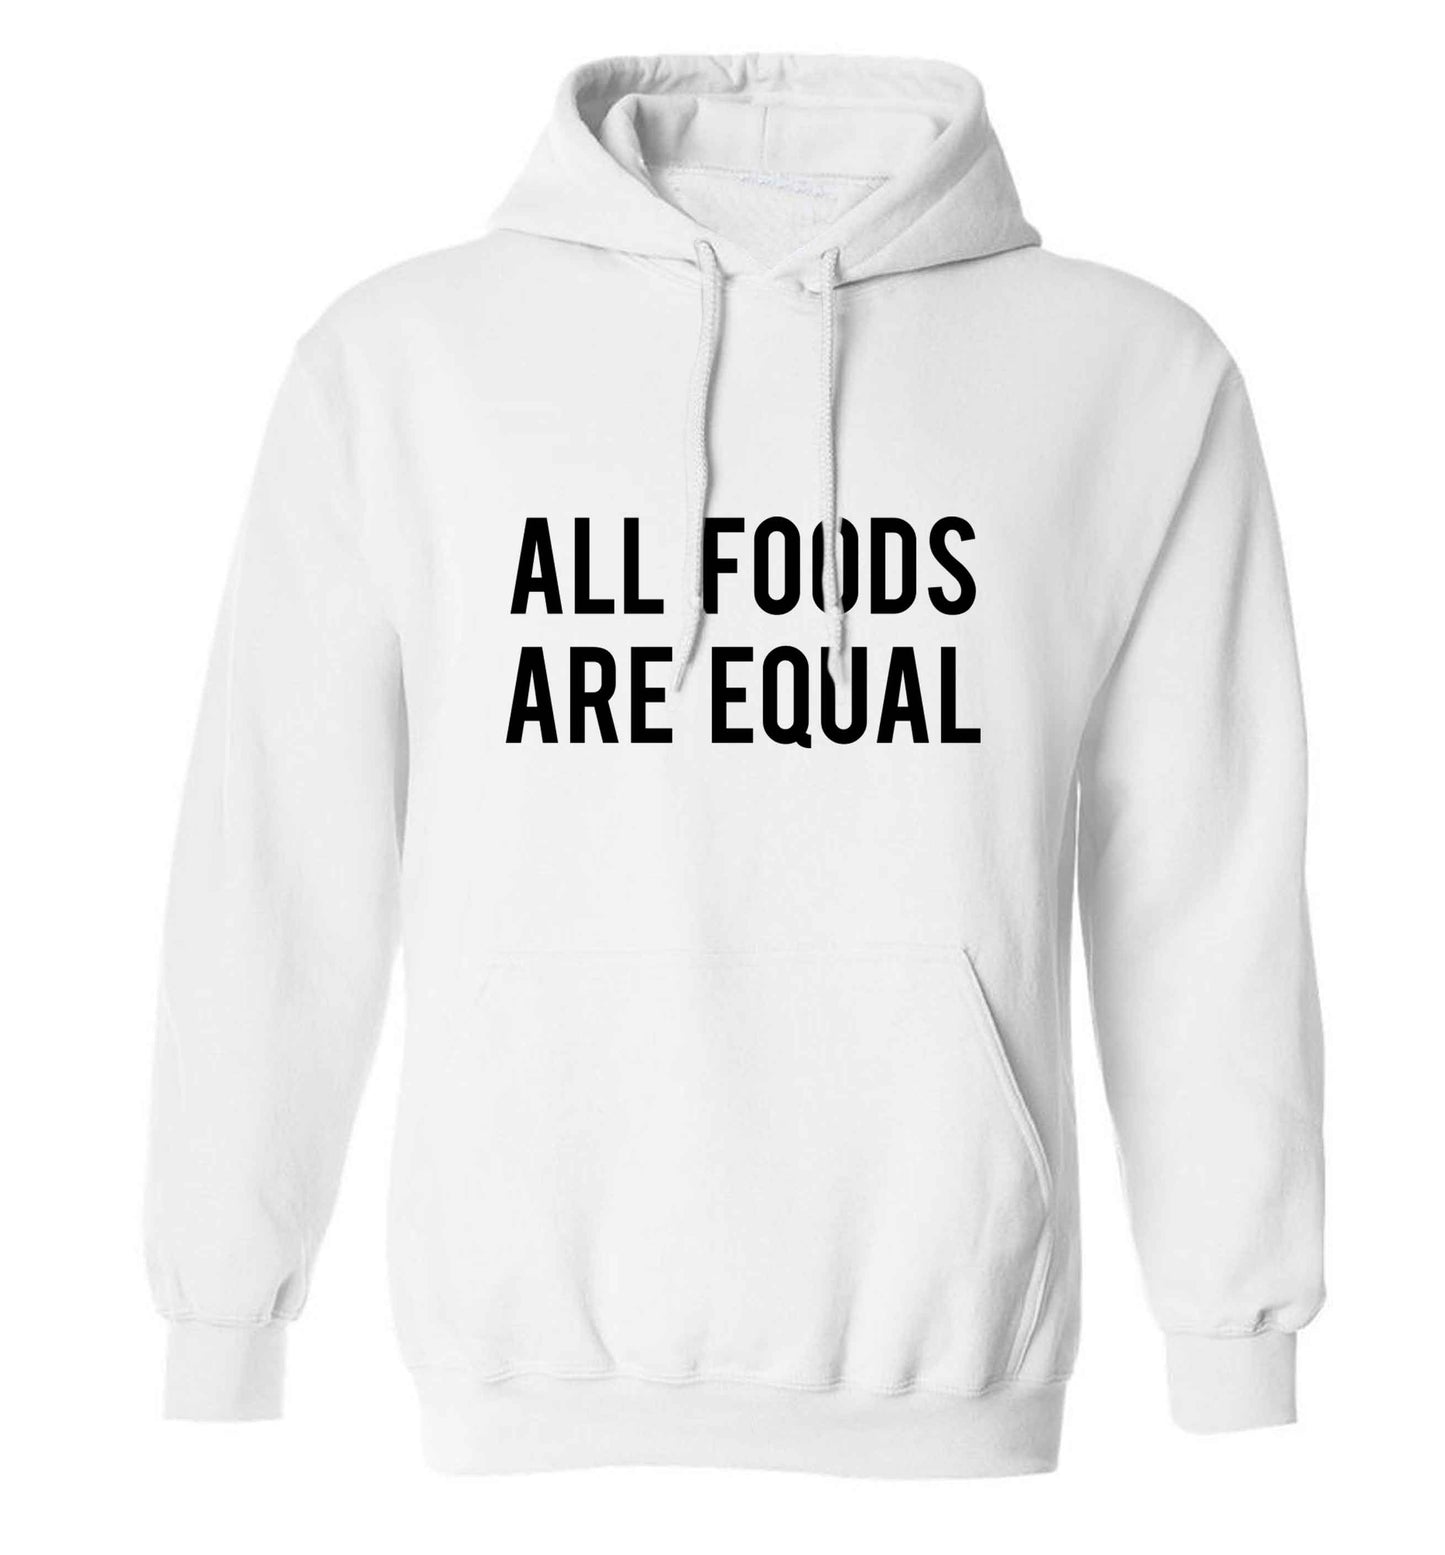 All foods are equal adults unisex white hoodie 2XL